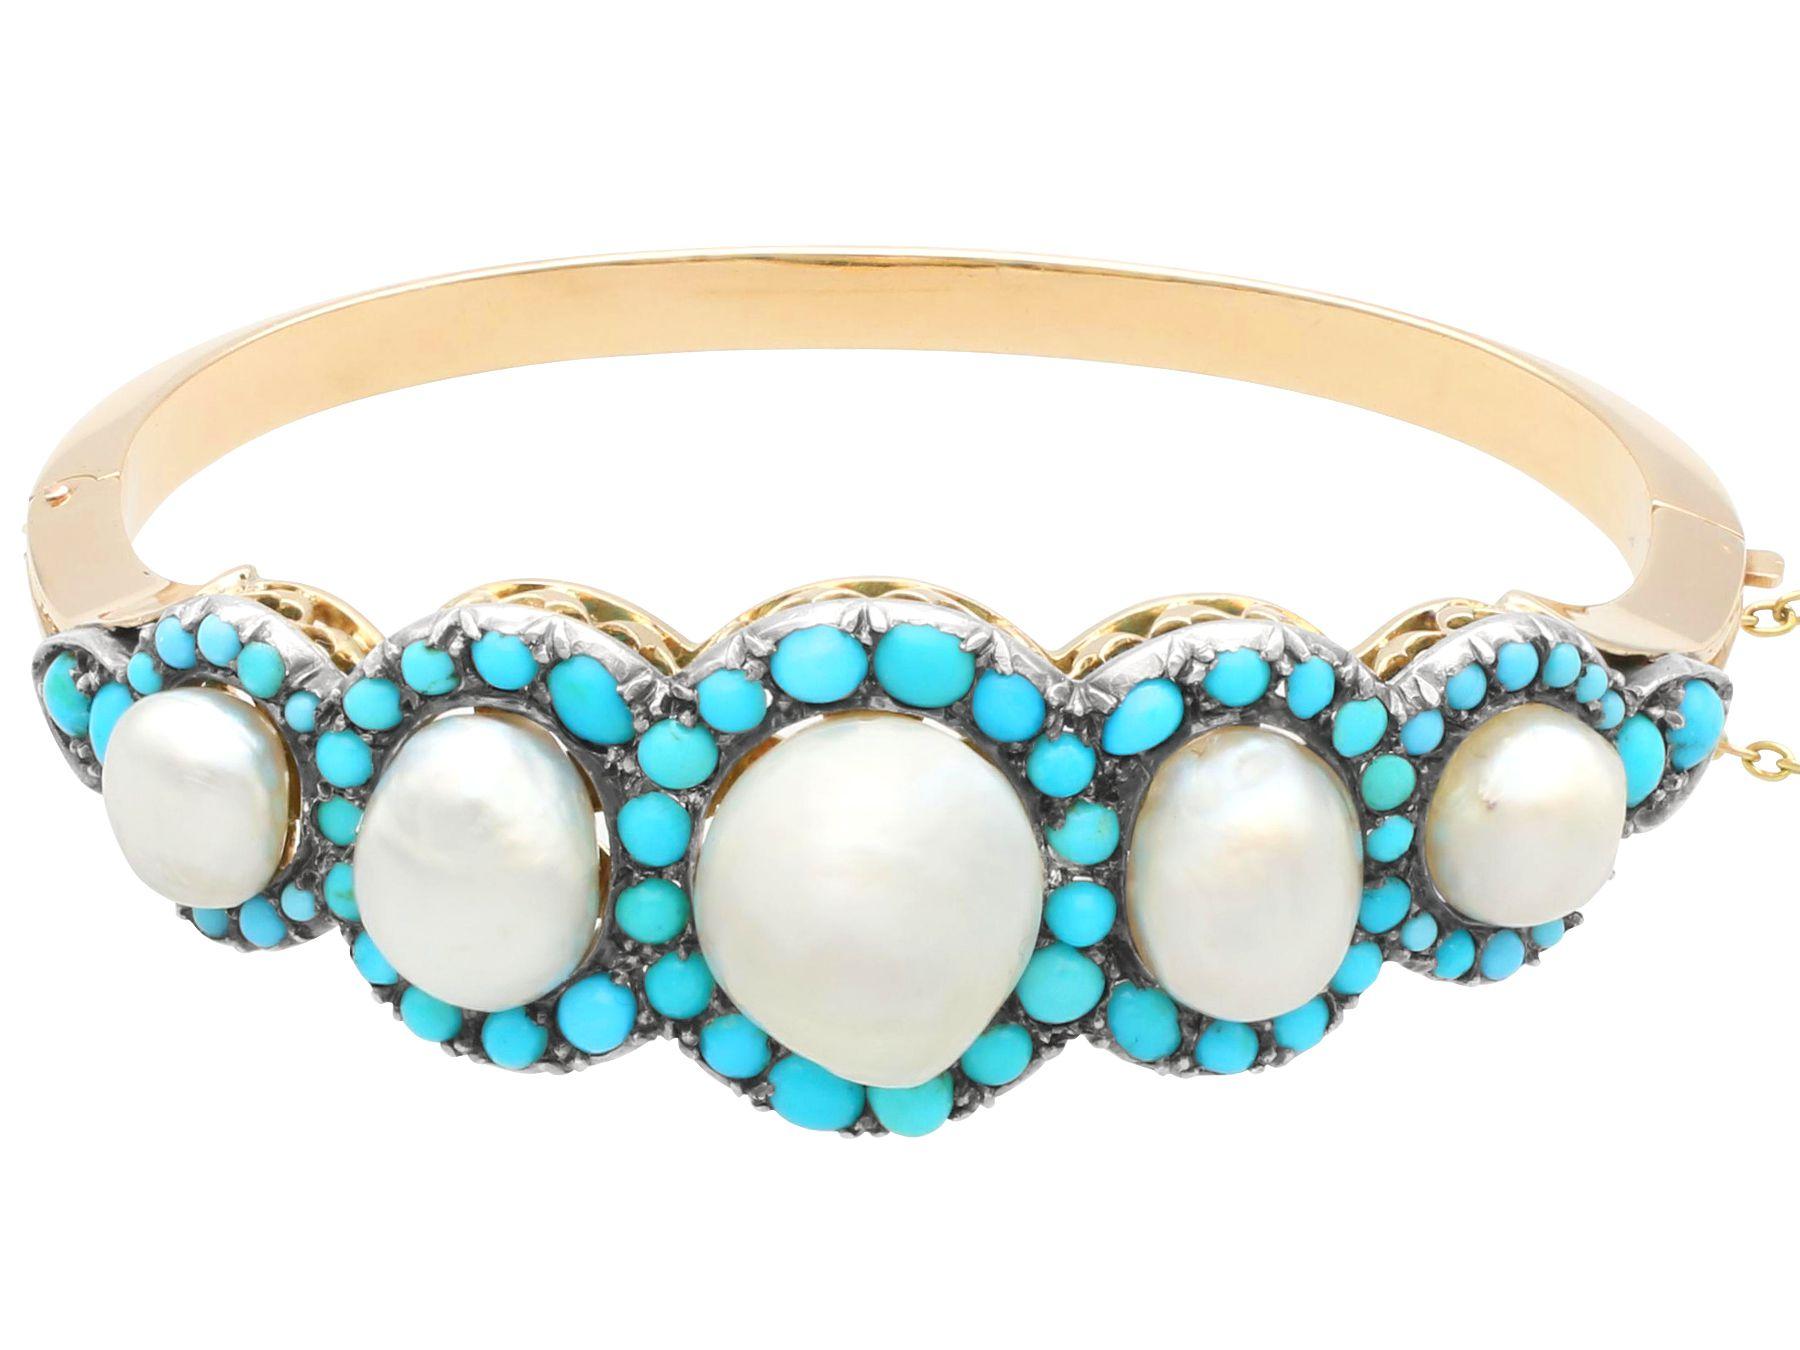 1880s Antique Victorian Natural Pearl and Turquoise Gold Bangle In Excellent Condition For Sale In Jesmond, Newcastle Upon Tyne